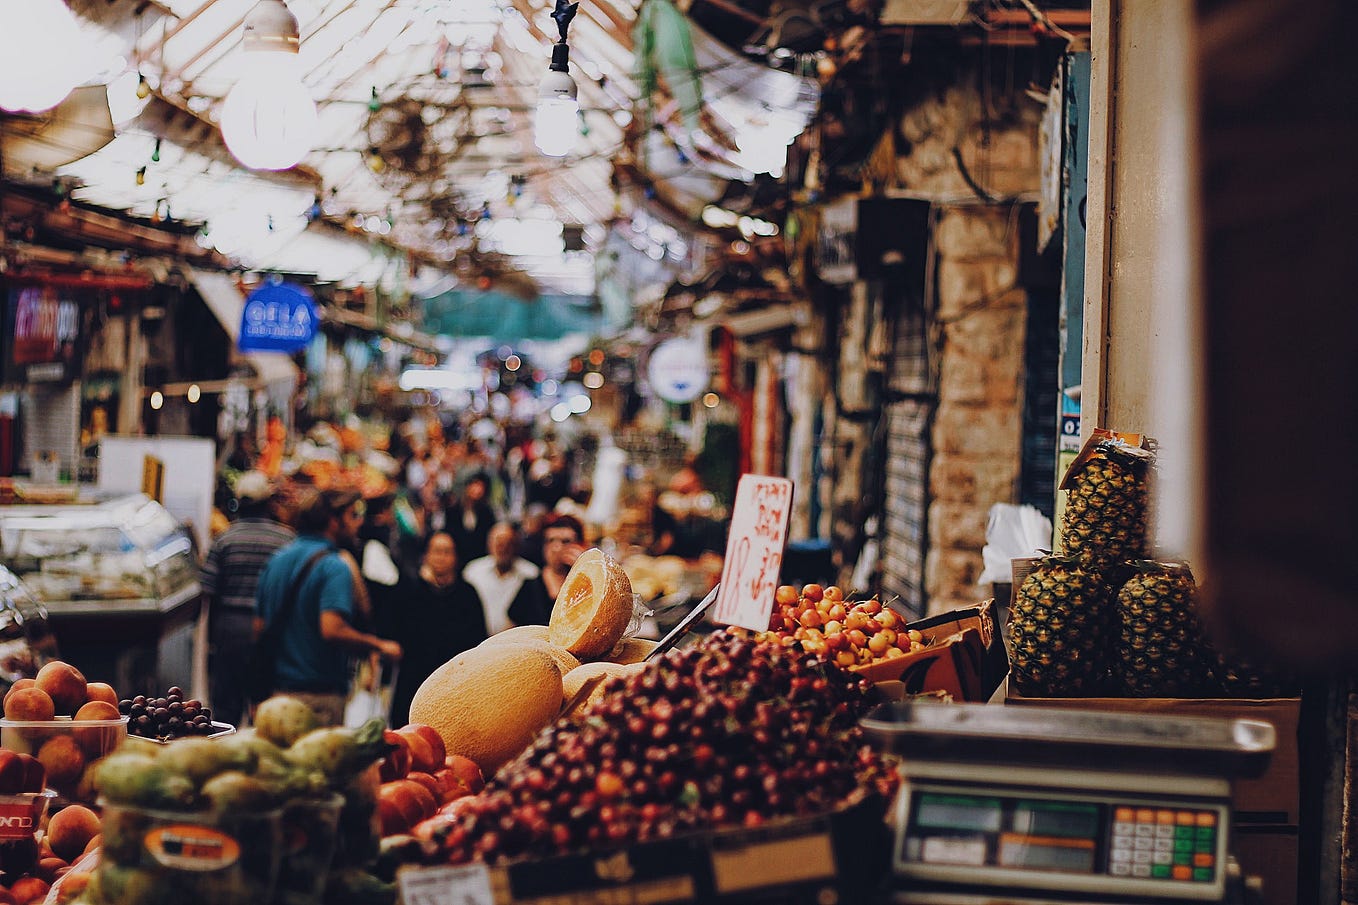 7 Amazing Hebrew Phrases For Everyday Life That Have No English Equivalent